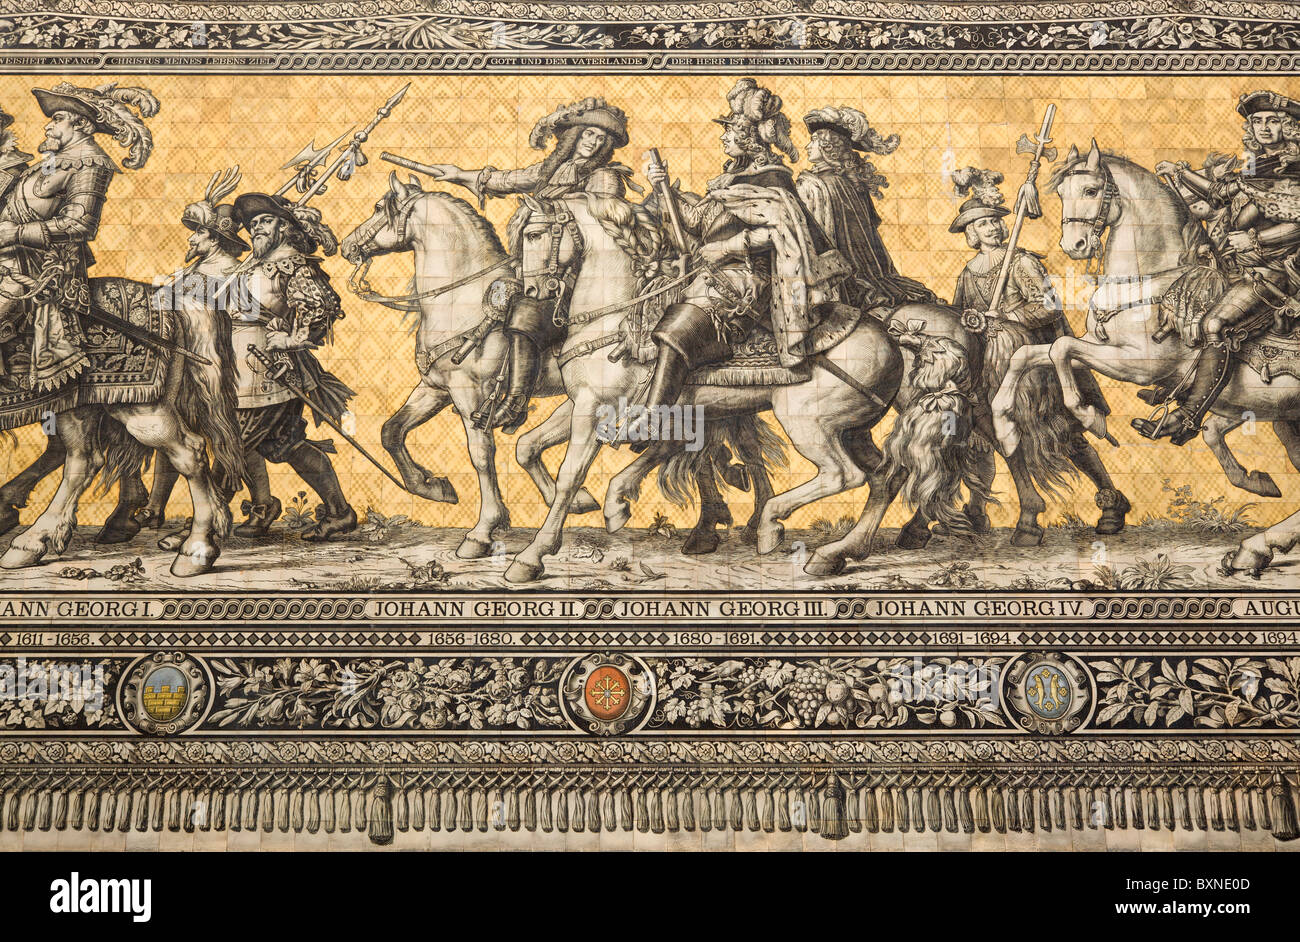 GERMANY Saxony Dresden Meissen tile mural Fürstenzug or Procession of Dukes in Auguststrasse showing Johann George II III and IV Stock Photo